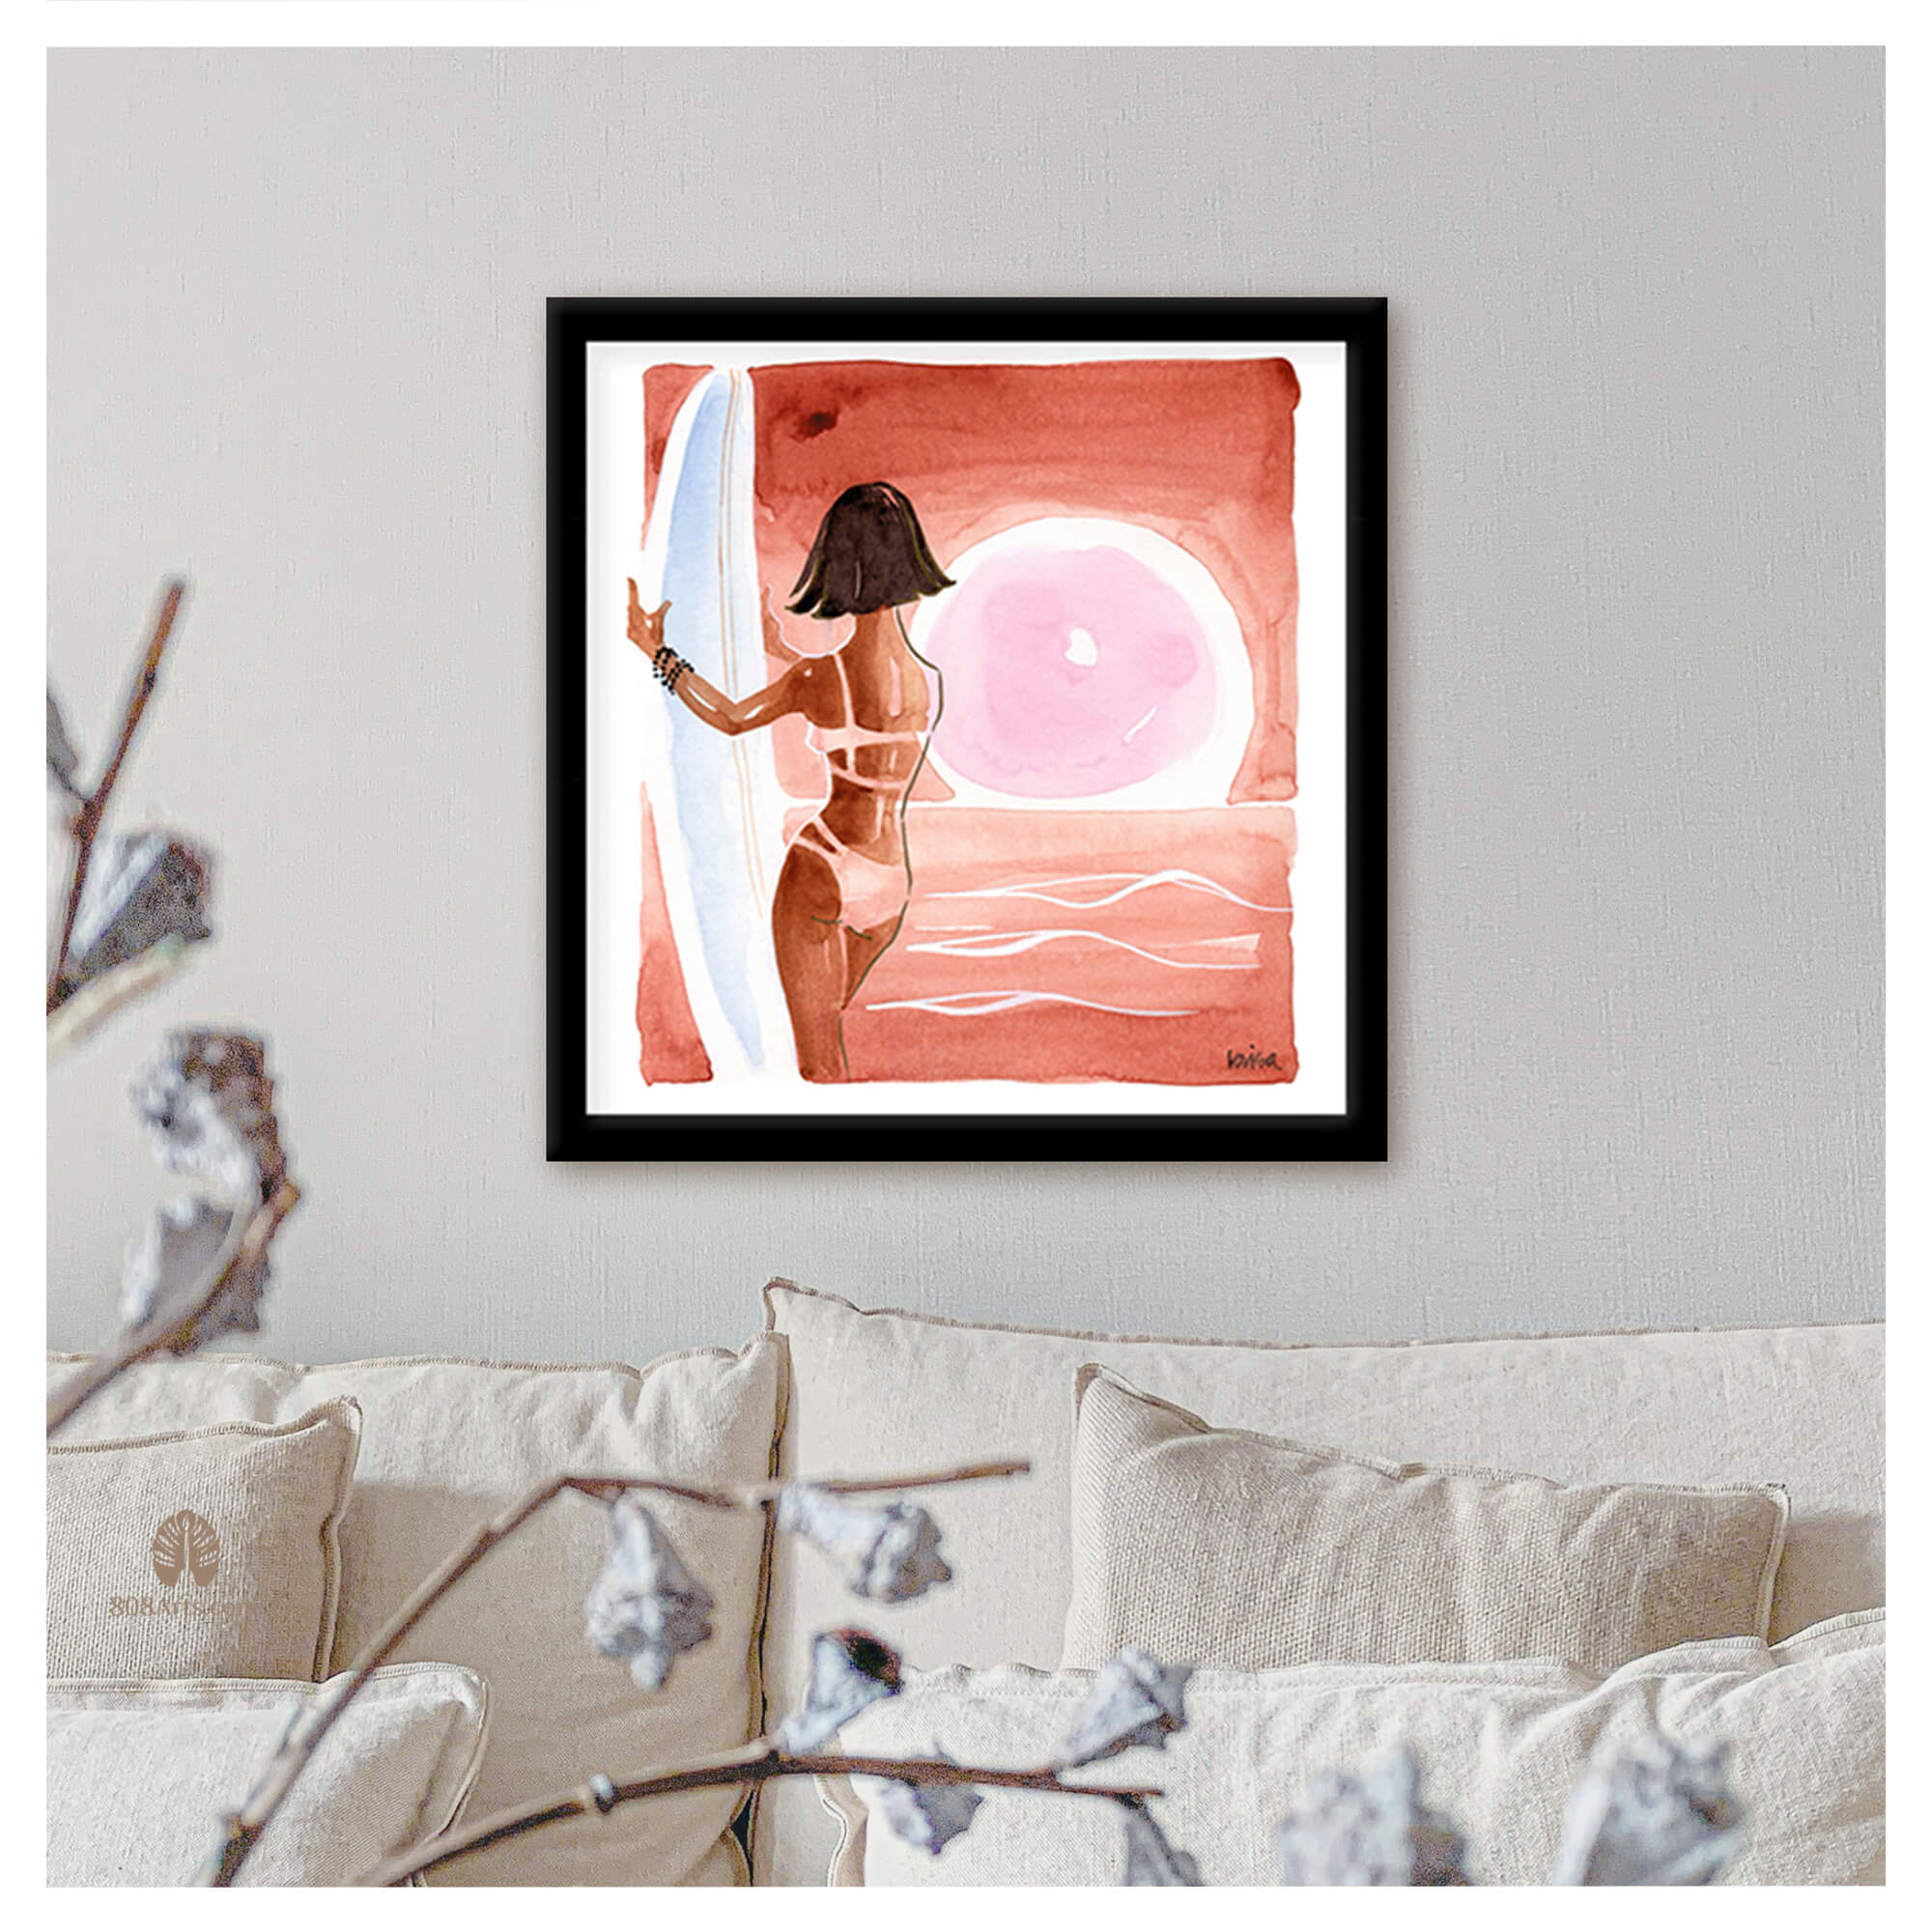 Framed paper giclée print of a watercolor artwork featuring a woman holding a surfboard while enjoying the sunset view by Hawaii artist Lovisa Oliv